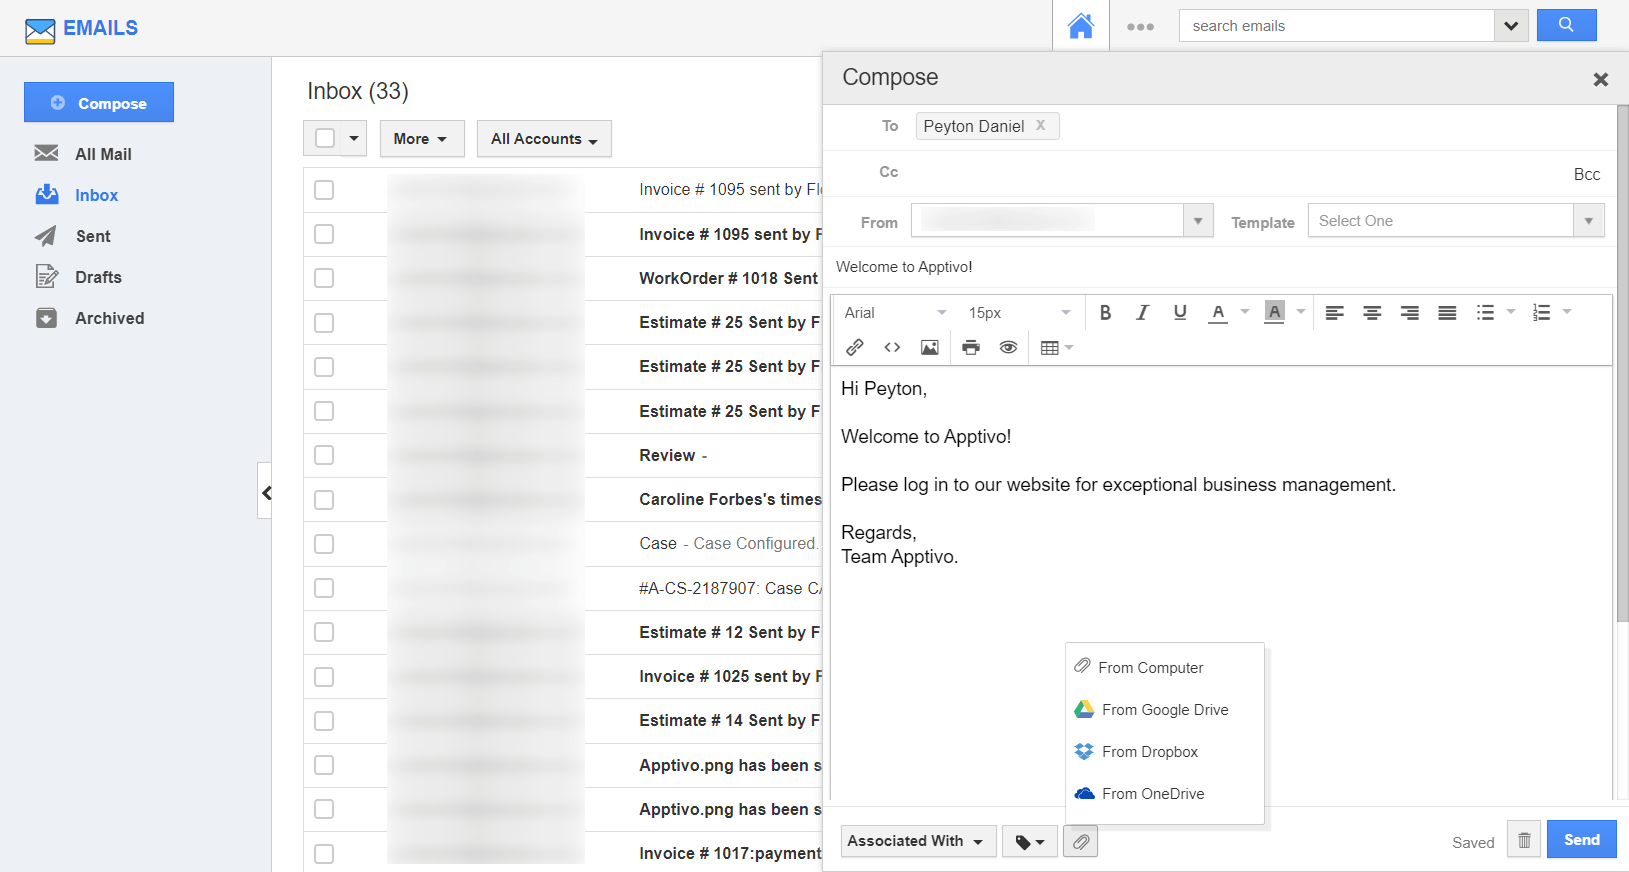 EmailsApp-AttachFiles.png